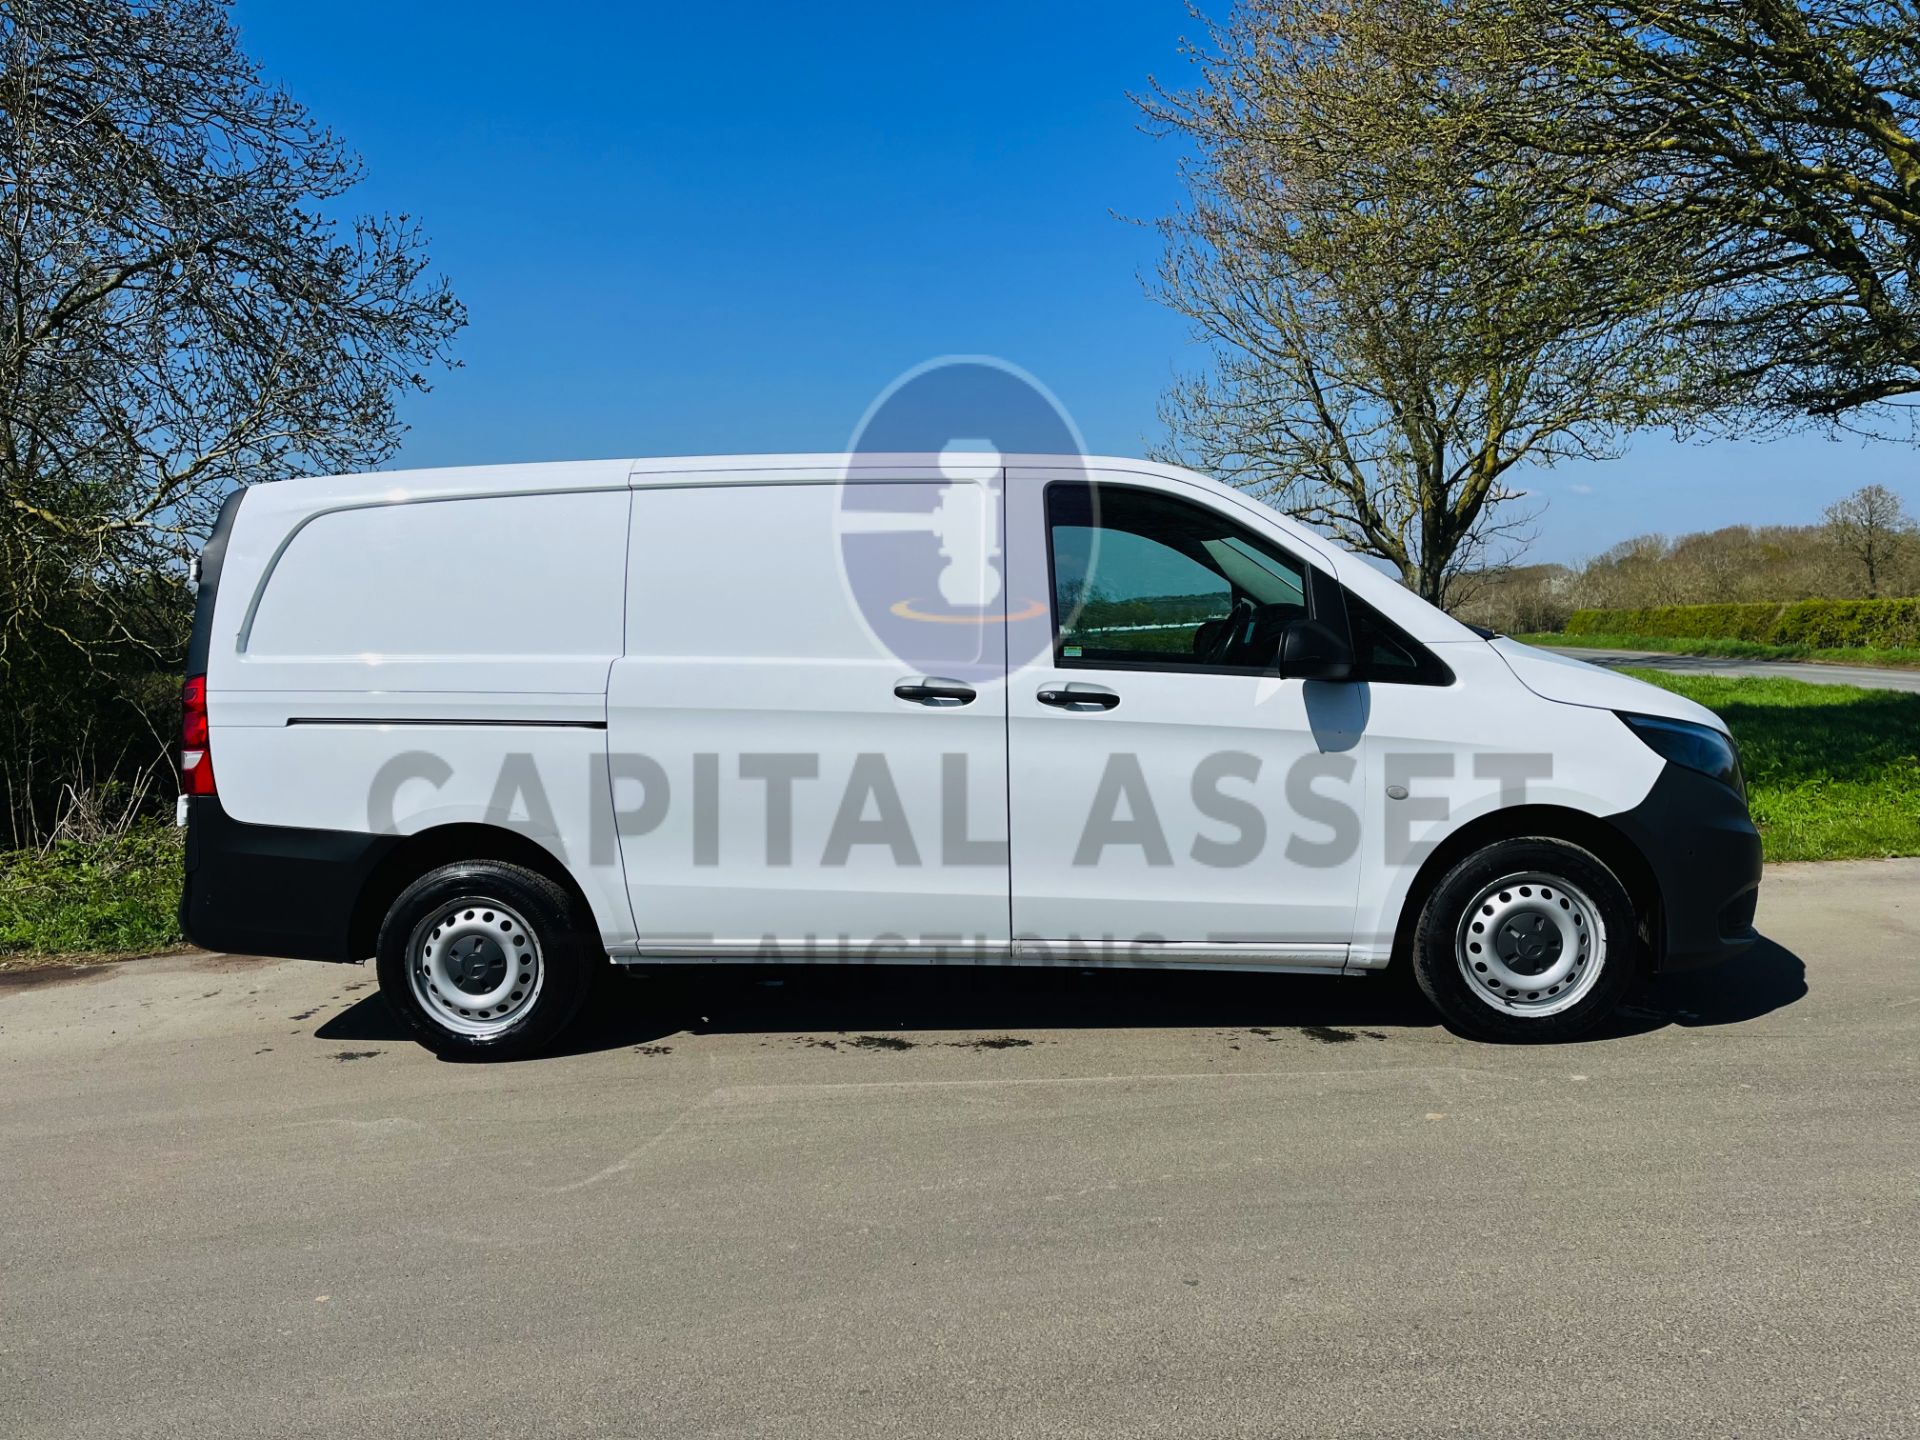 (ON SALE) MERCEDES VITO 114CDI PURE LWB (20 REG) 1 OWNER WITH HISTORY (AIR CON) SAT NAV-EURO 6 - Image 12 of 30